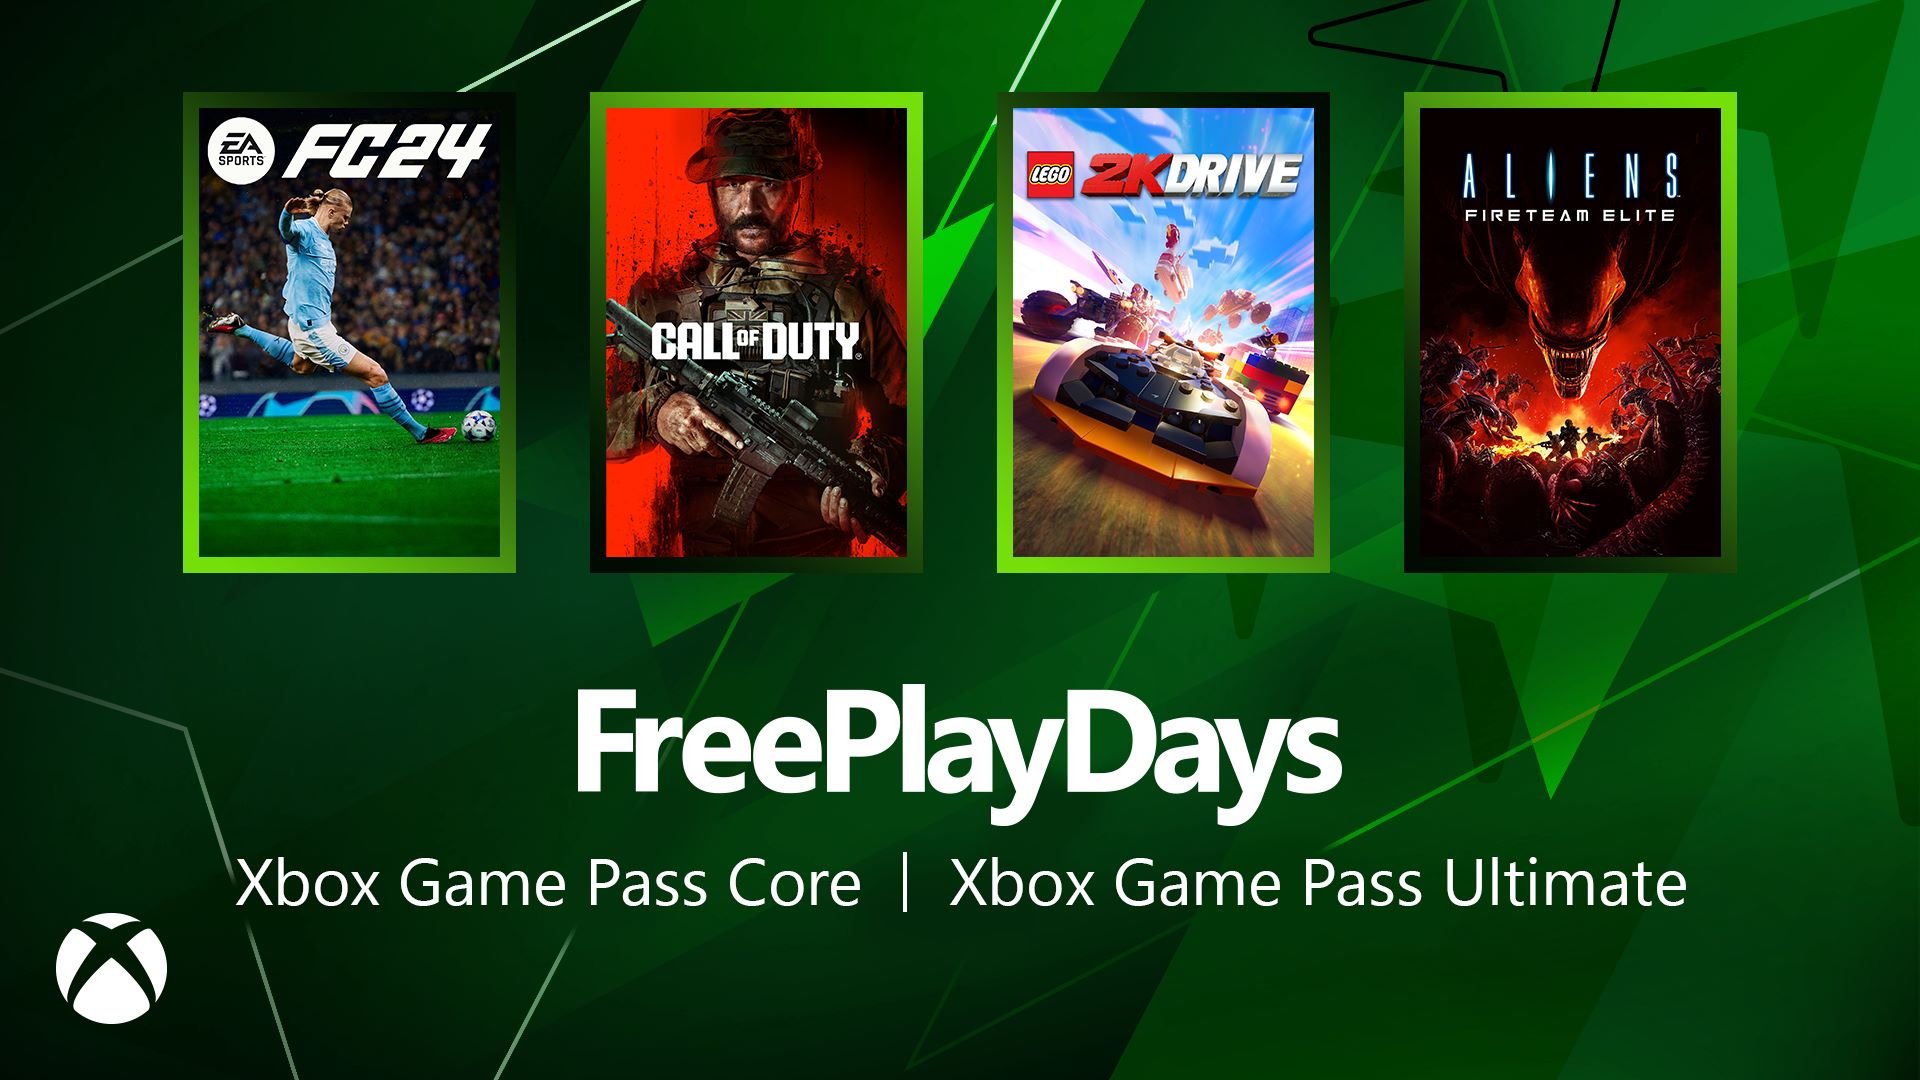 Free Play Days – Call of Duty Modern Warfare III (Multiplayer/Zombies Only), EA Sports FC 24, Lego 2k Drive and Aliens: Fireteam Elite